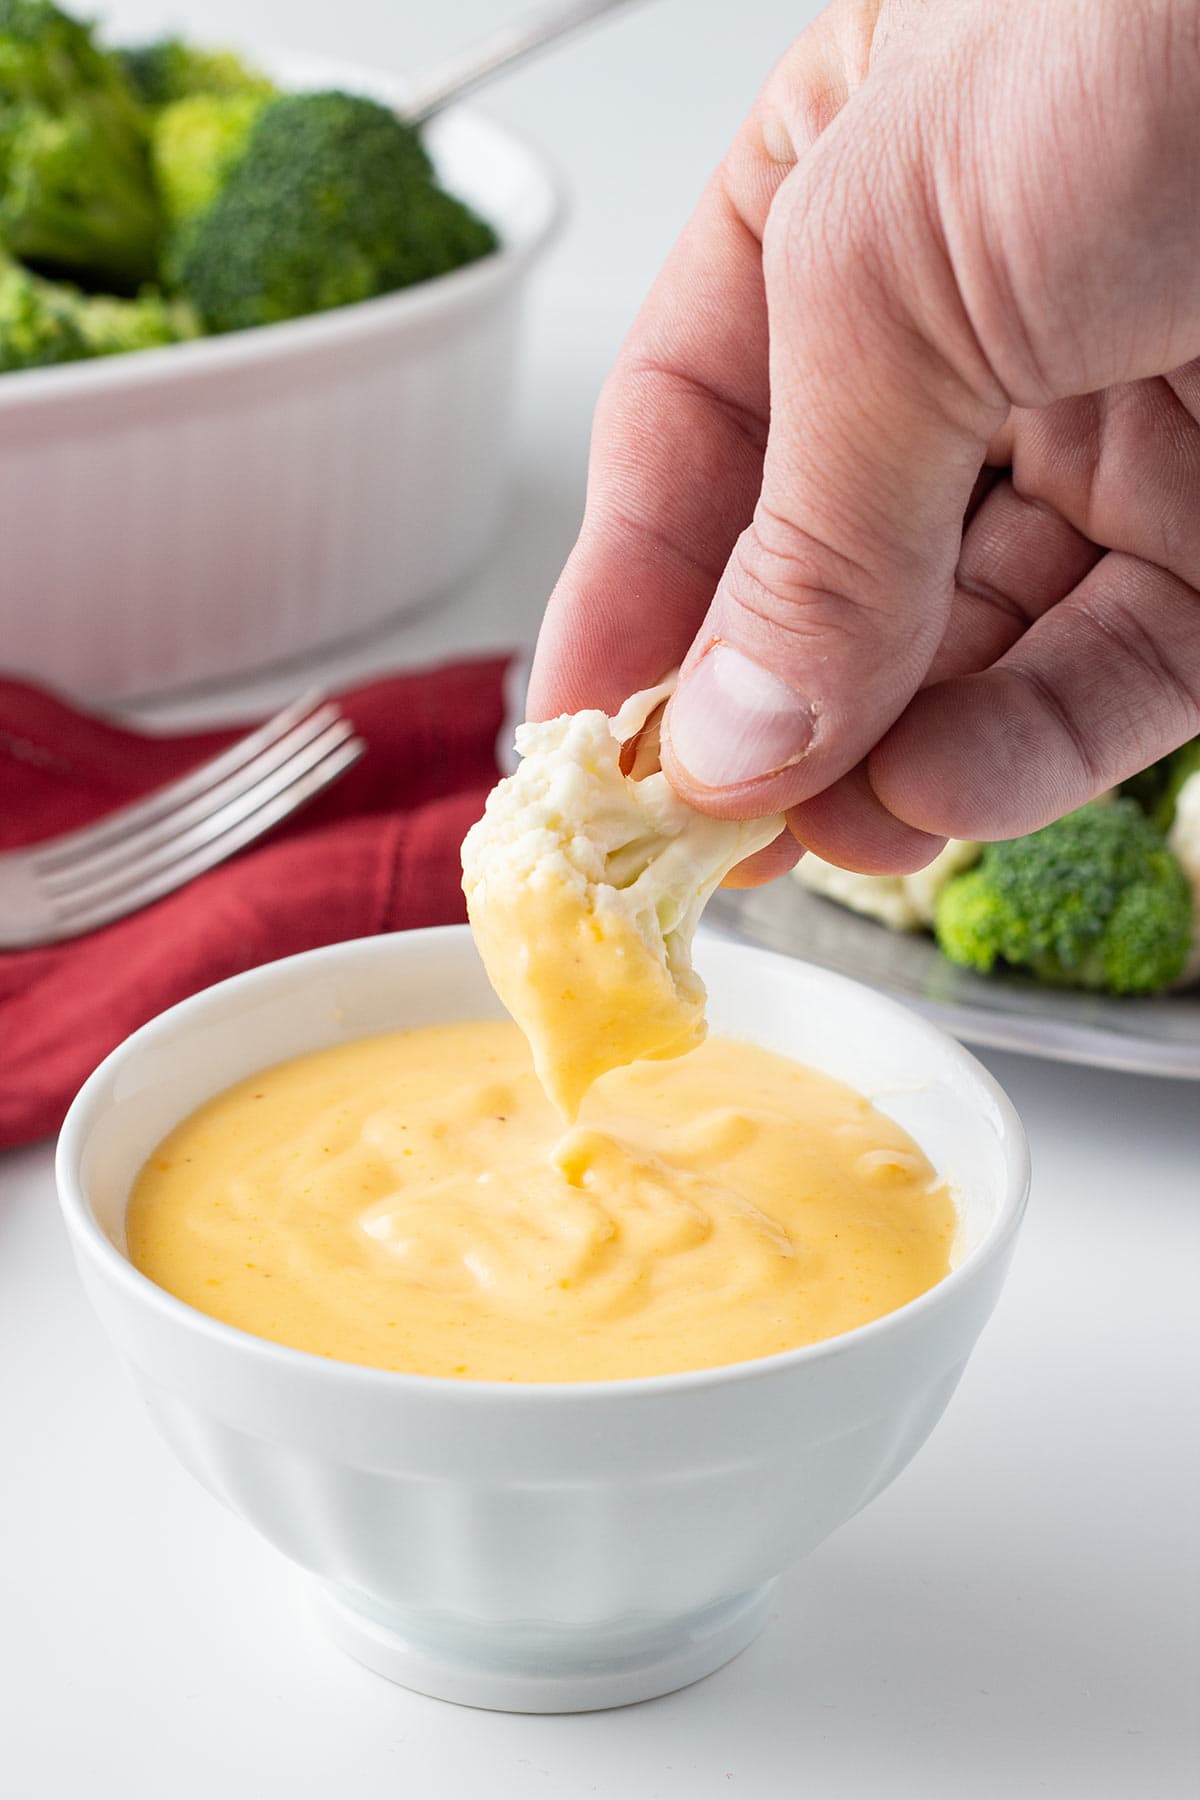 Cauliflower being dipped into a bowl of Freezable Cheese Sauce.